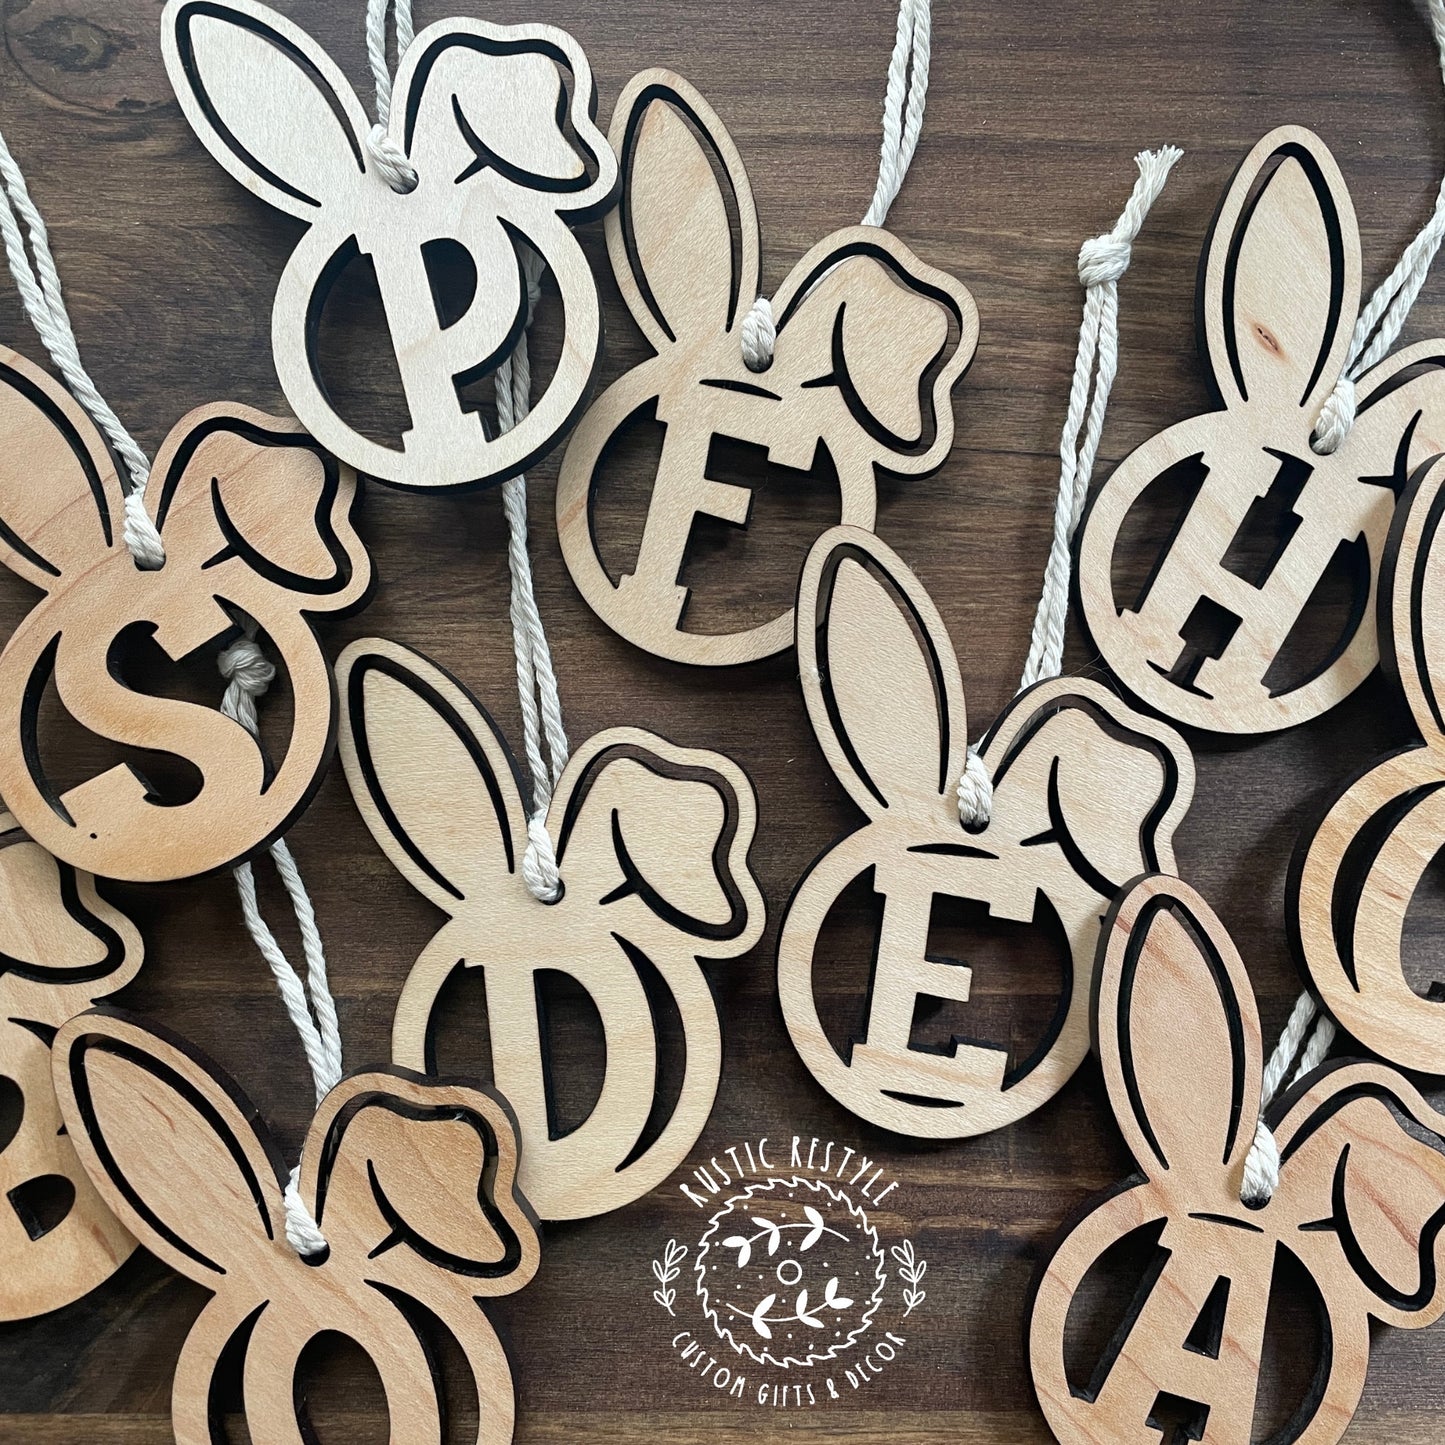 Initial Bunny Letter Basket tags, Monogram ornaments or Easter Basket tags